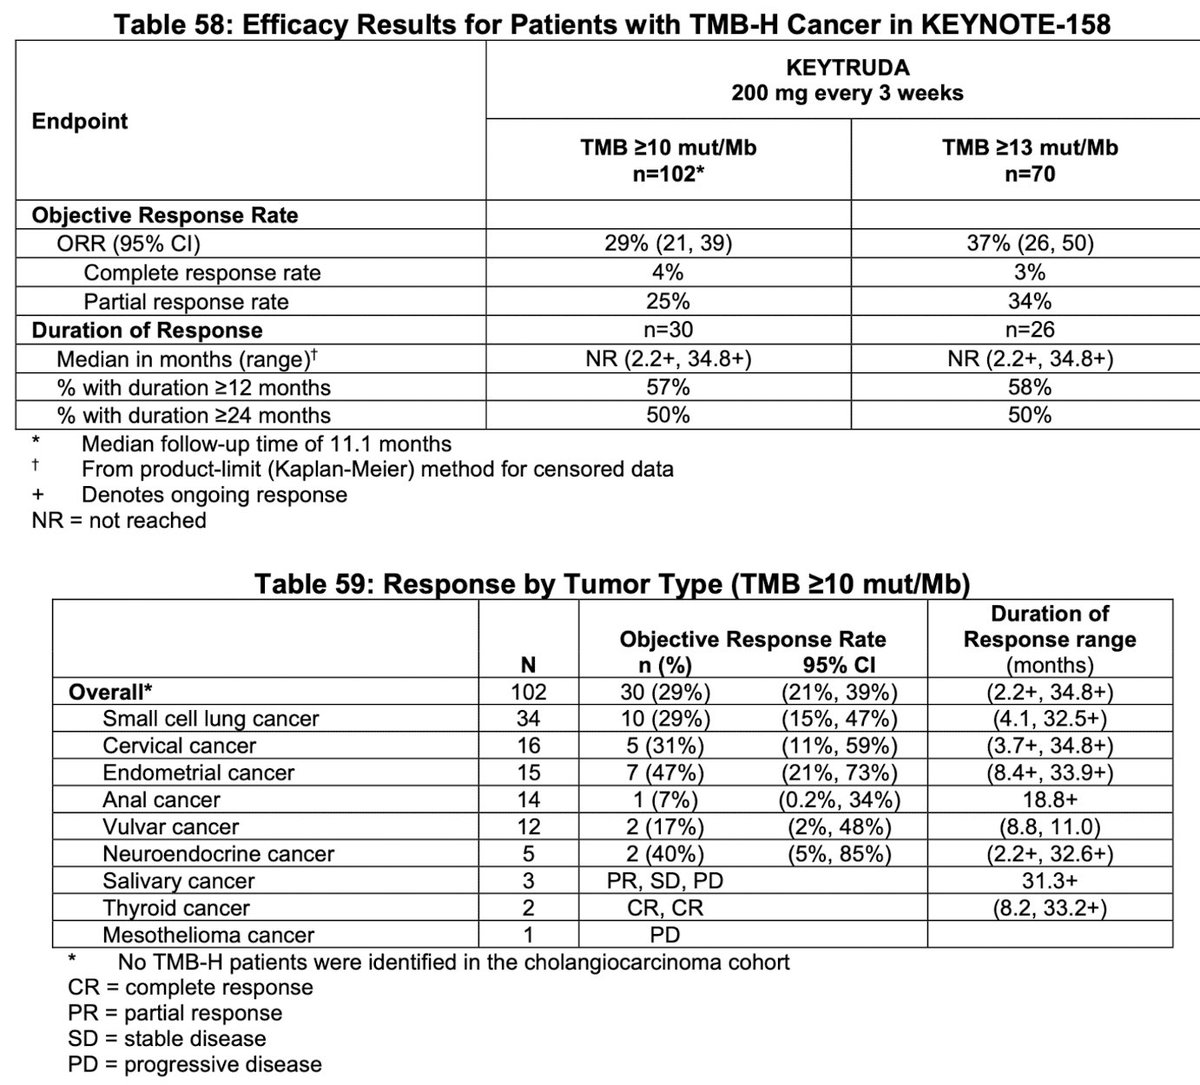 This is the most important table: Thanks to  @agrothey for providing this. The approval was based off of these 100 patients in 10 tumor types